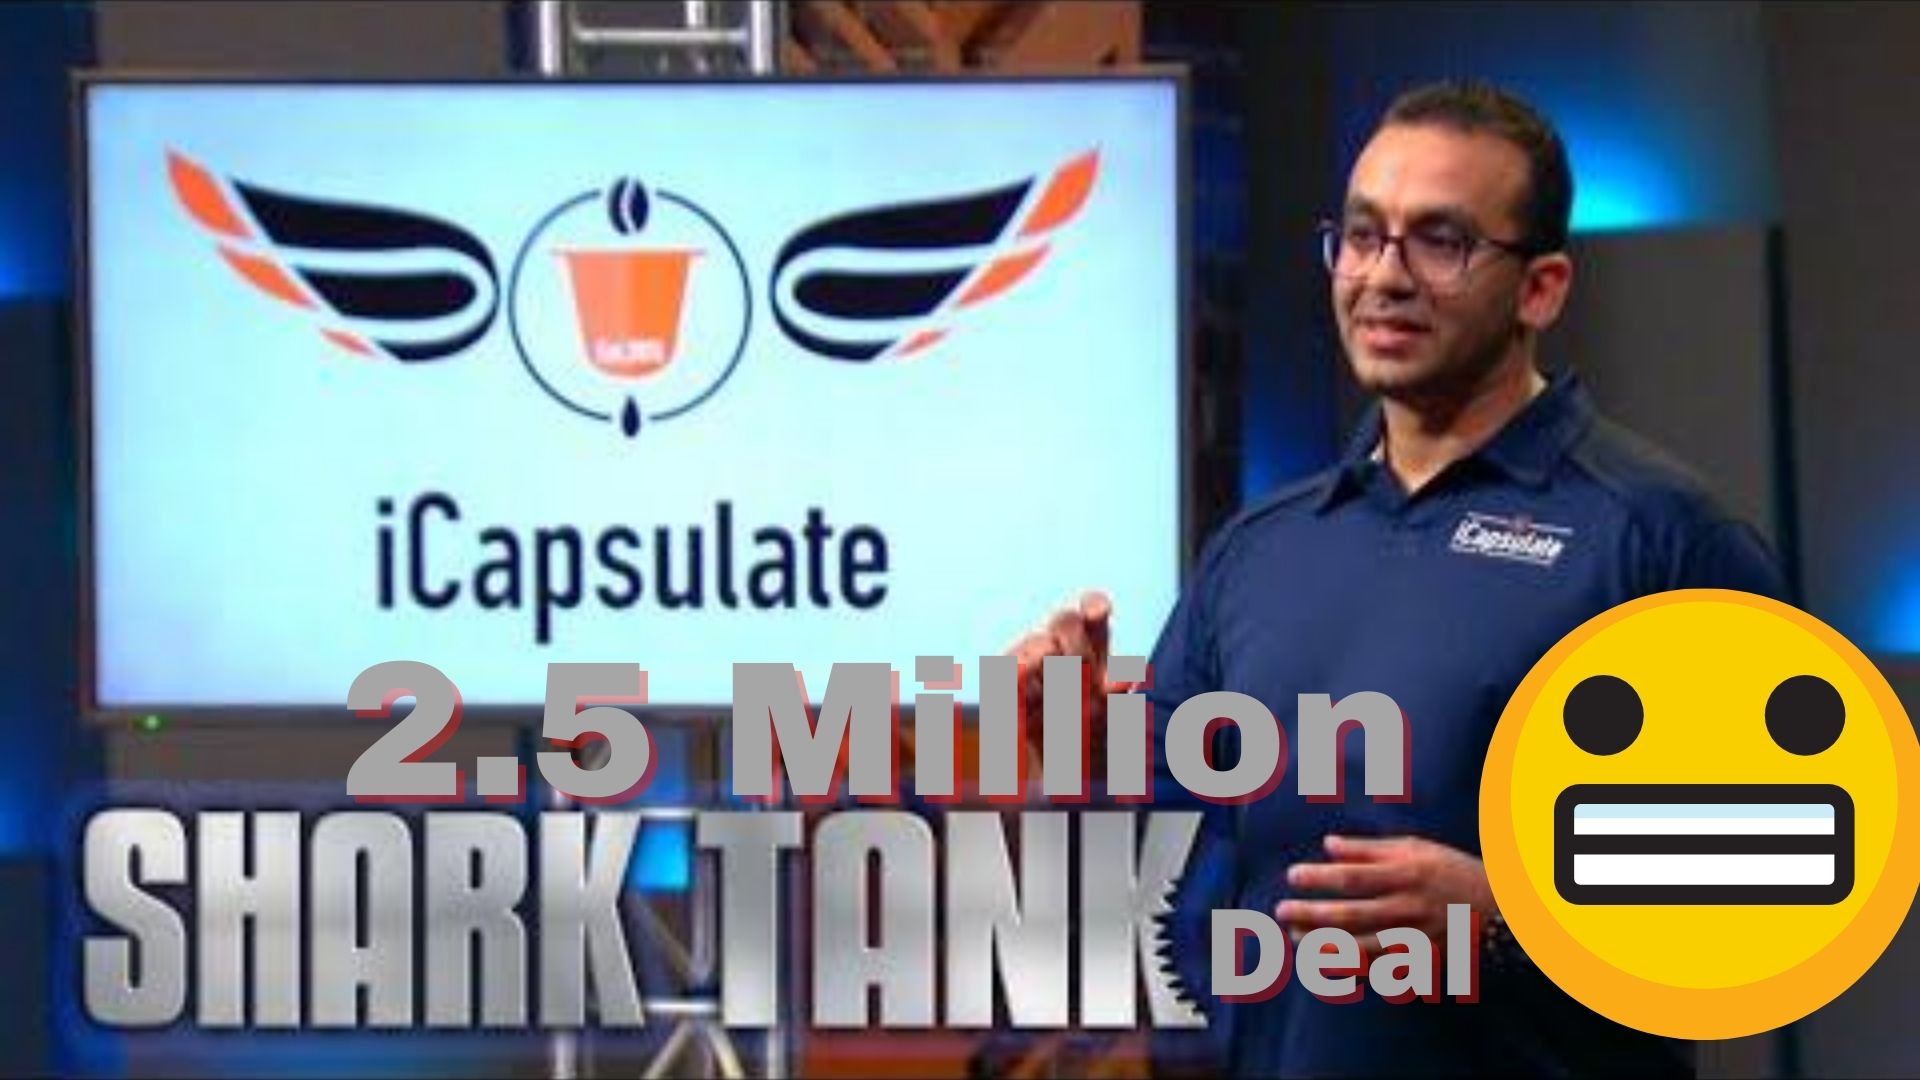 What really happened to iCapsulate? Why The biggest deal ever made on Australian Shark Tank failed?